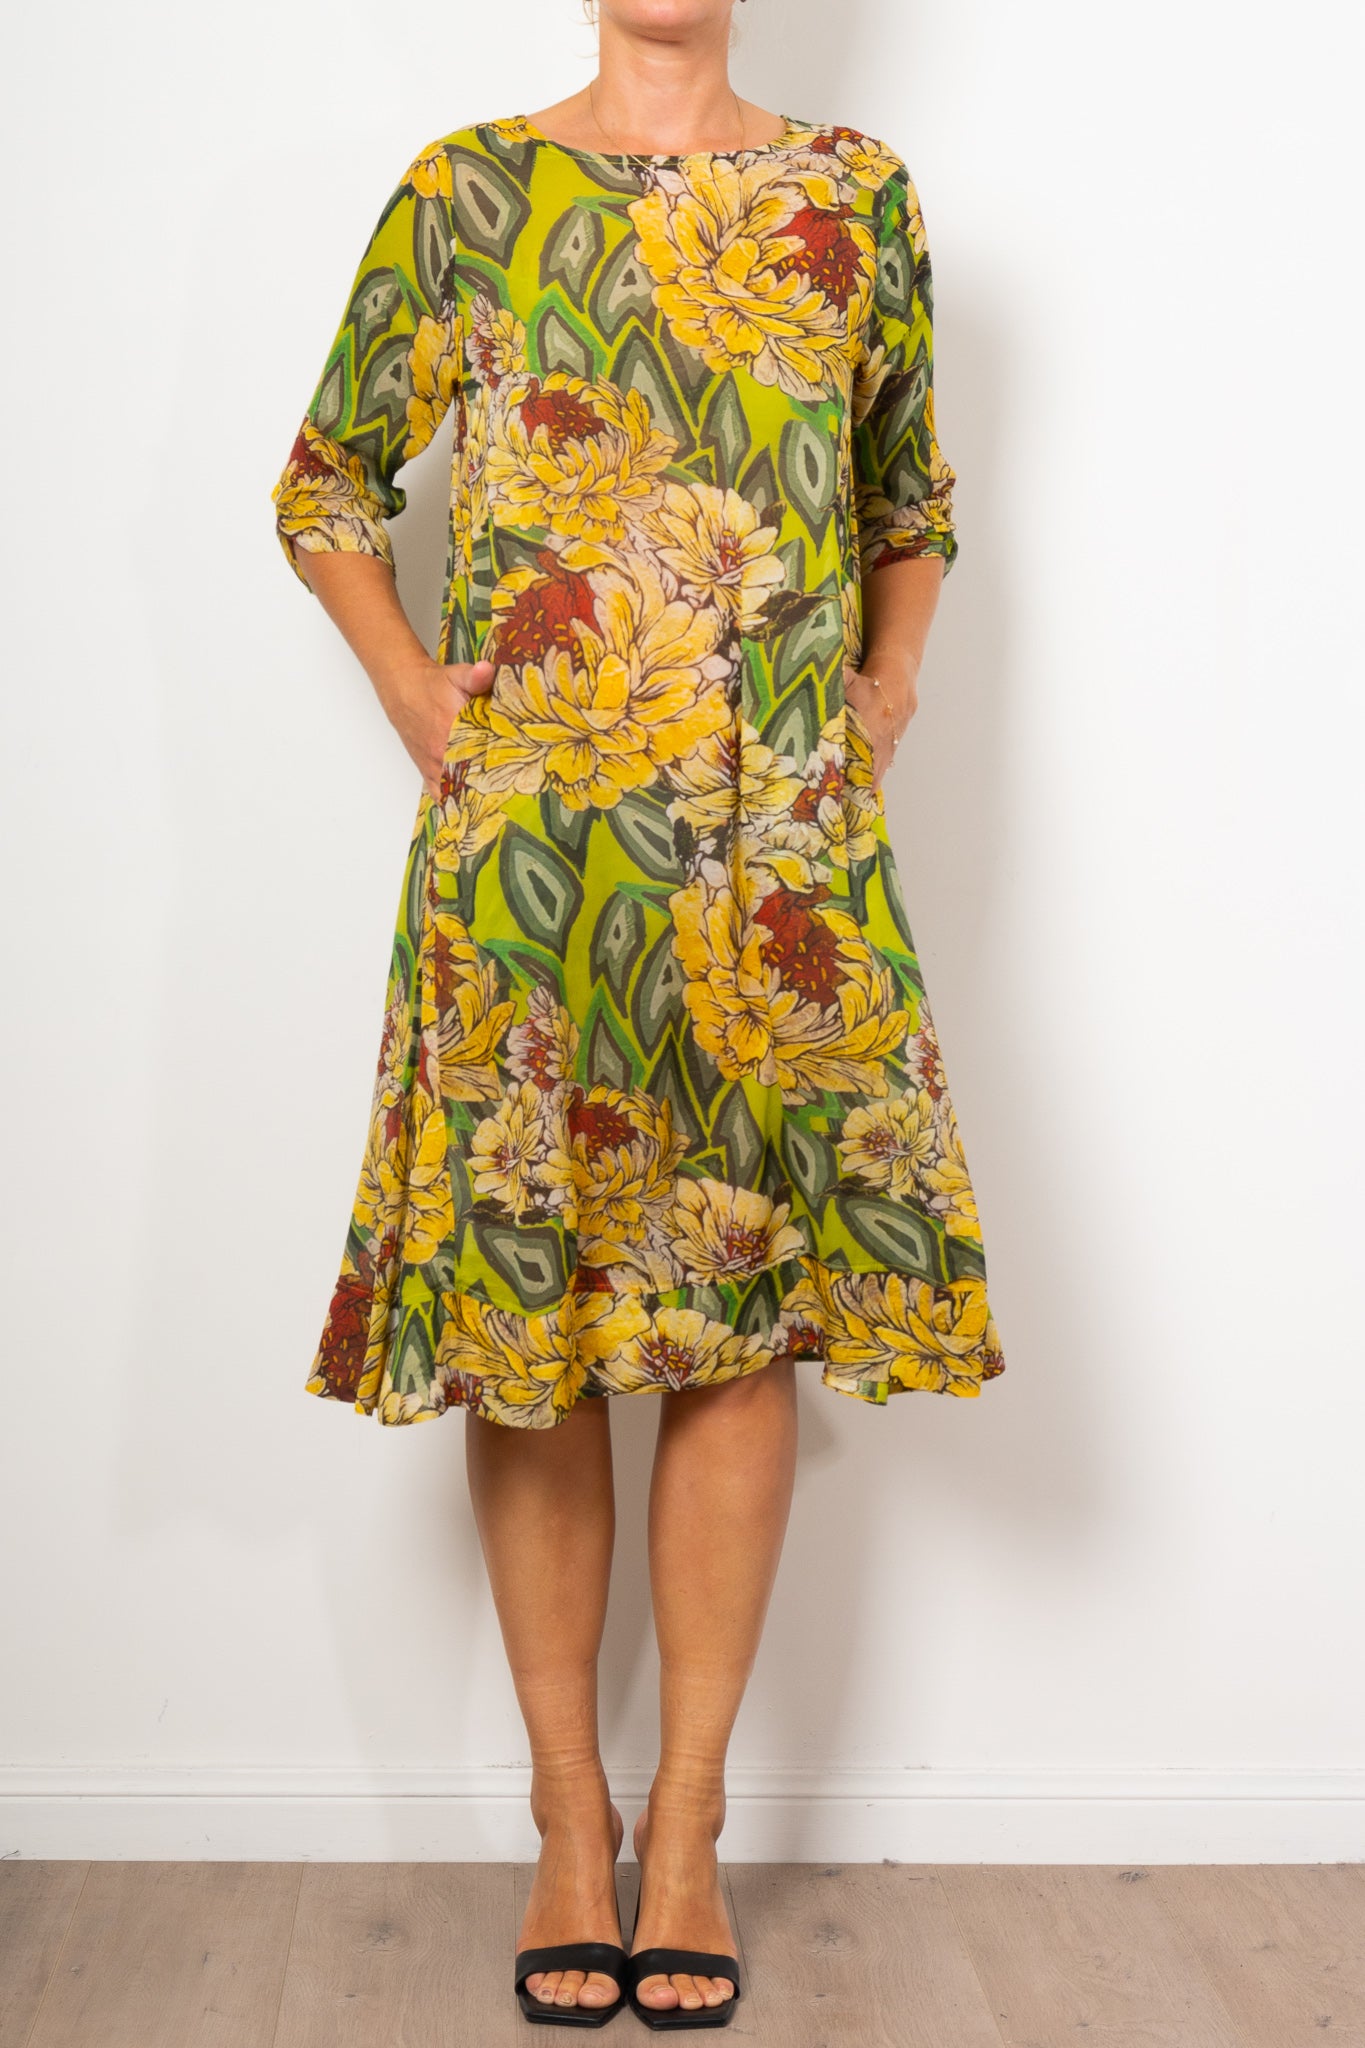 Curate by Trelise Cooper Face The Tunic Dress